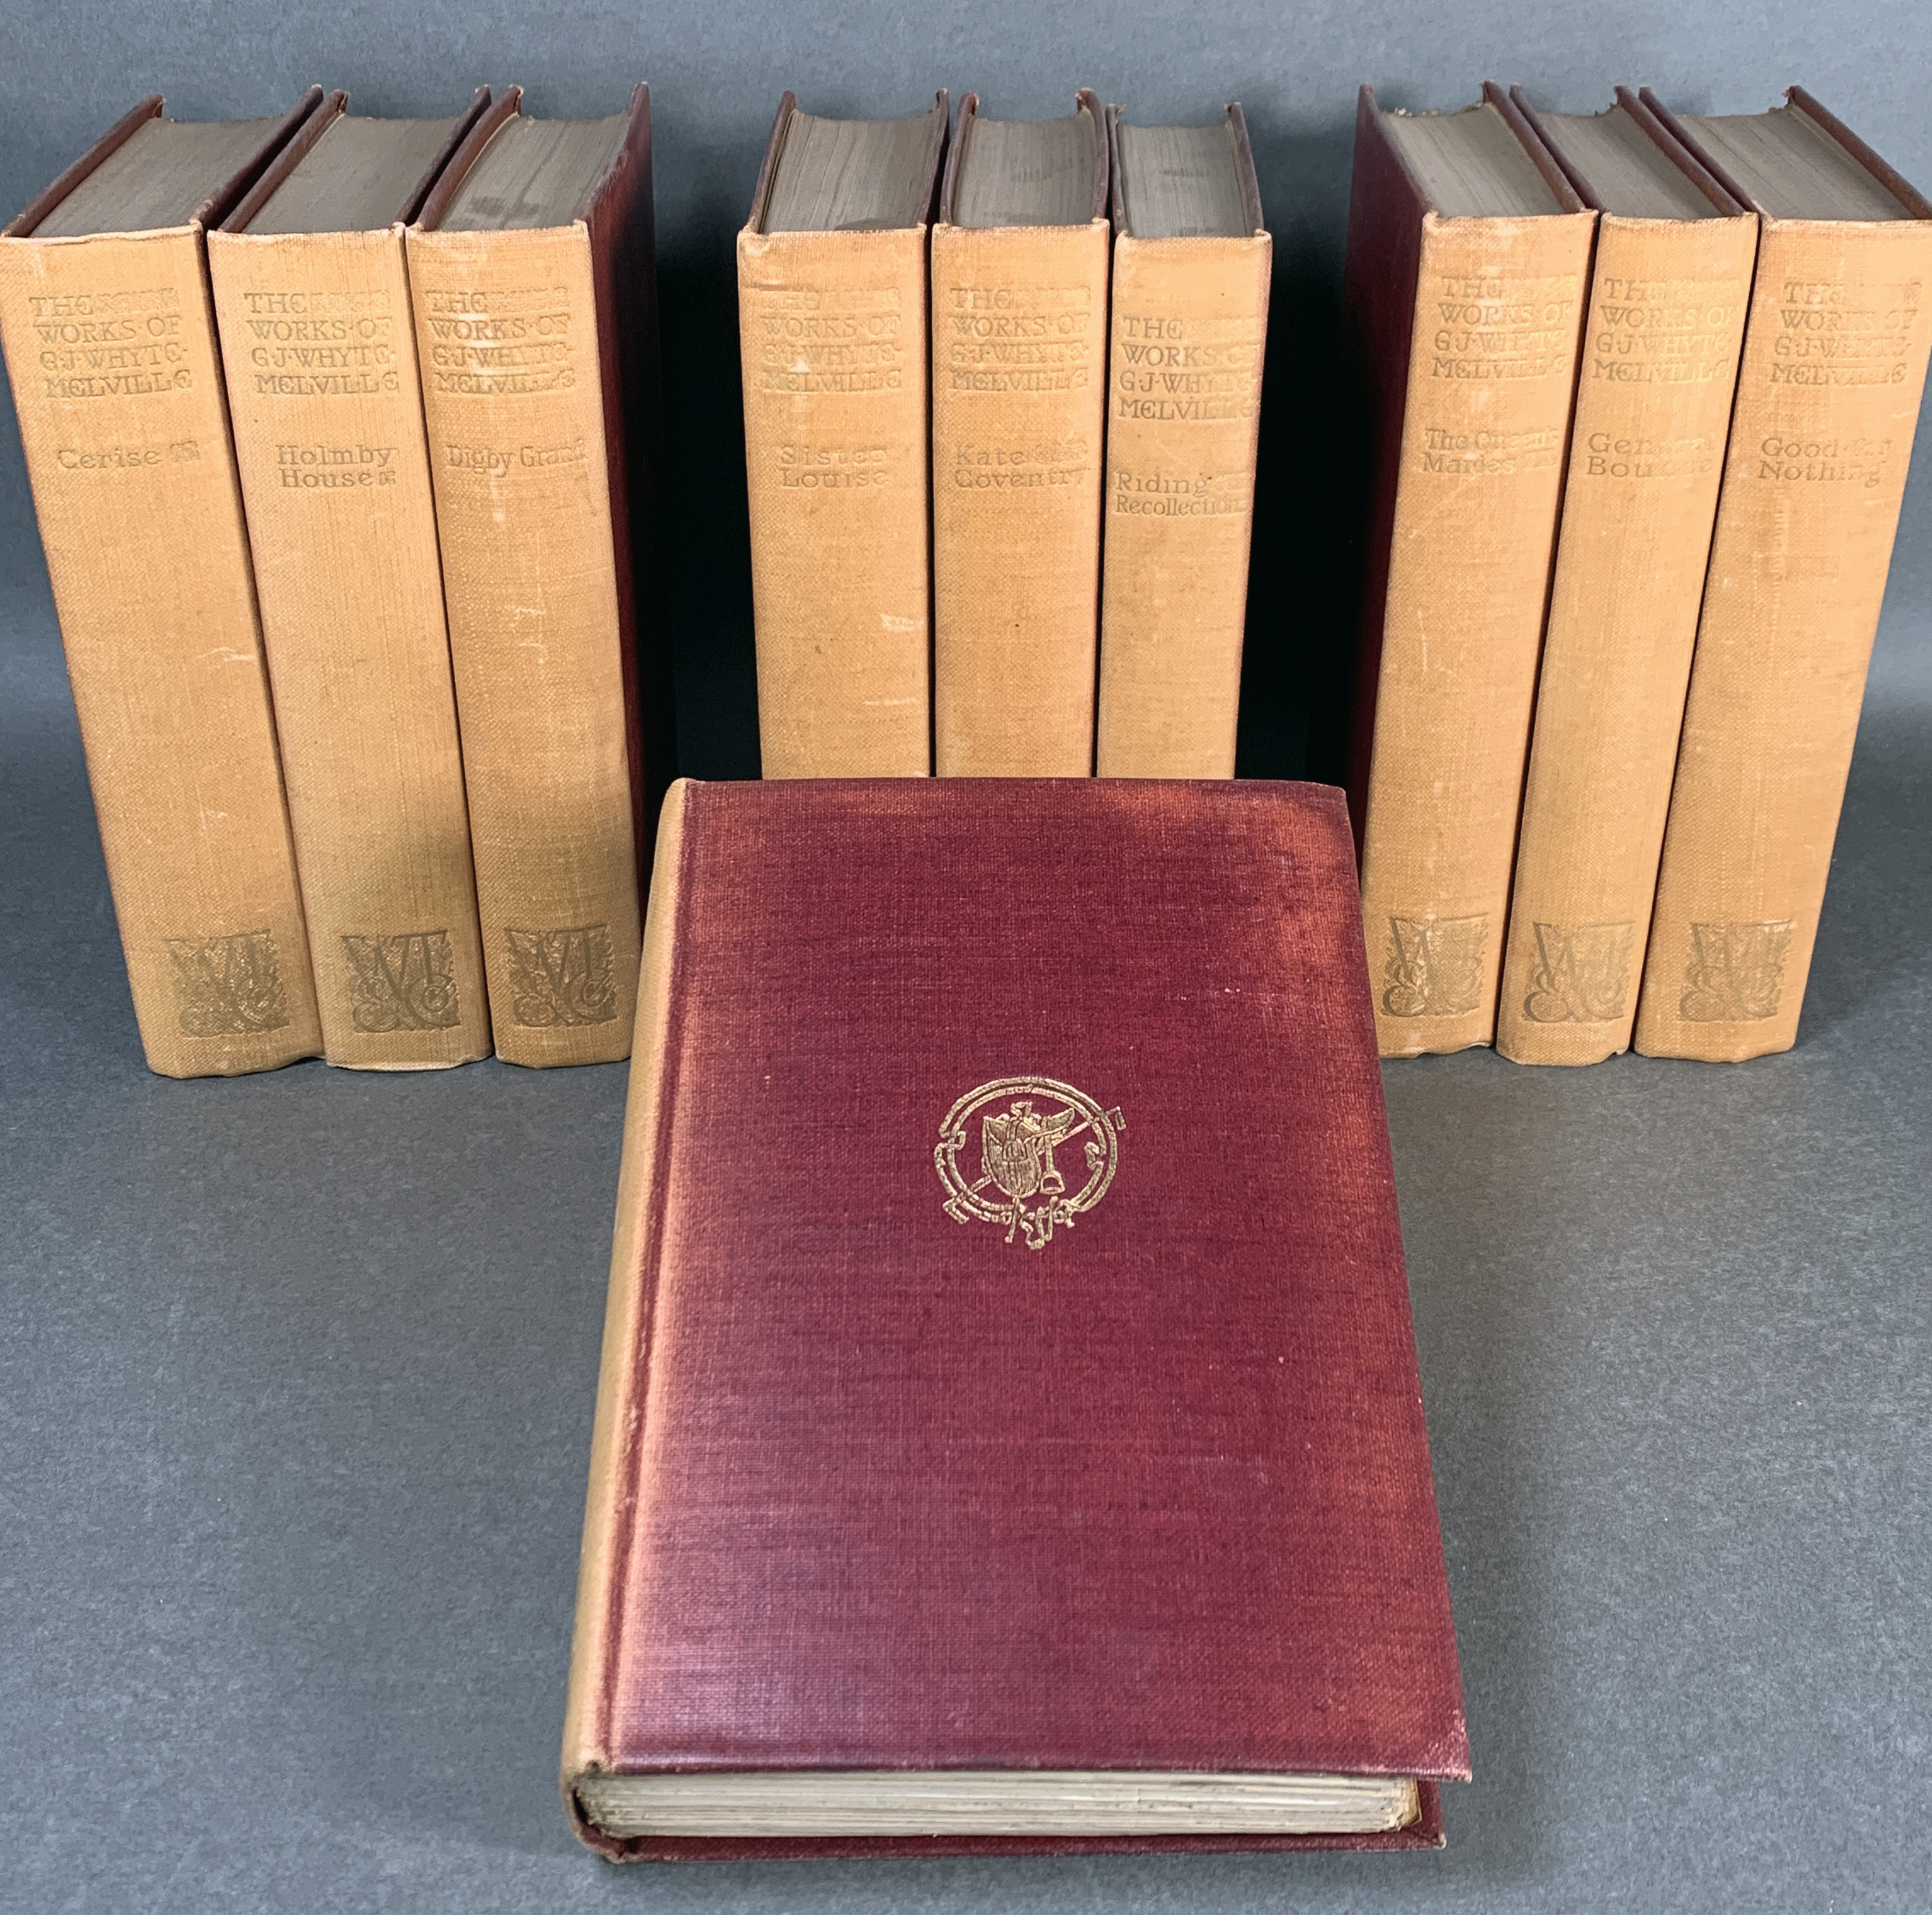 Limited Edition Gj Whyte-Melville Works 10 Volumes image 1